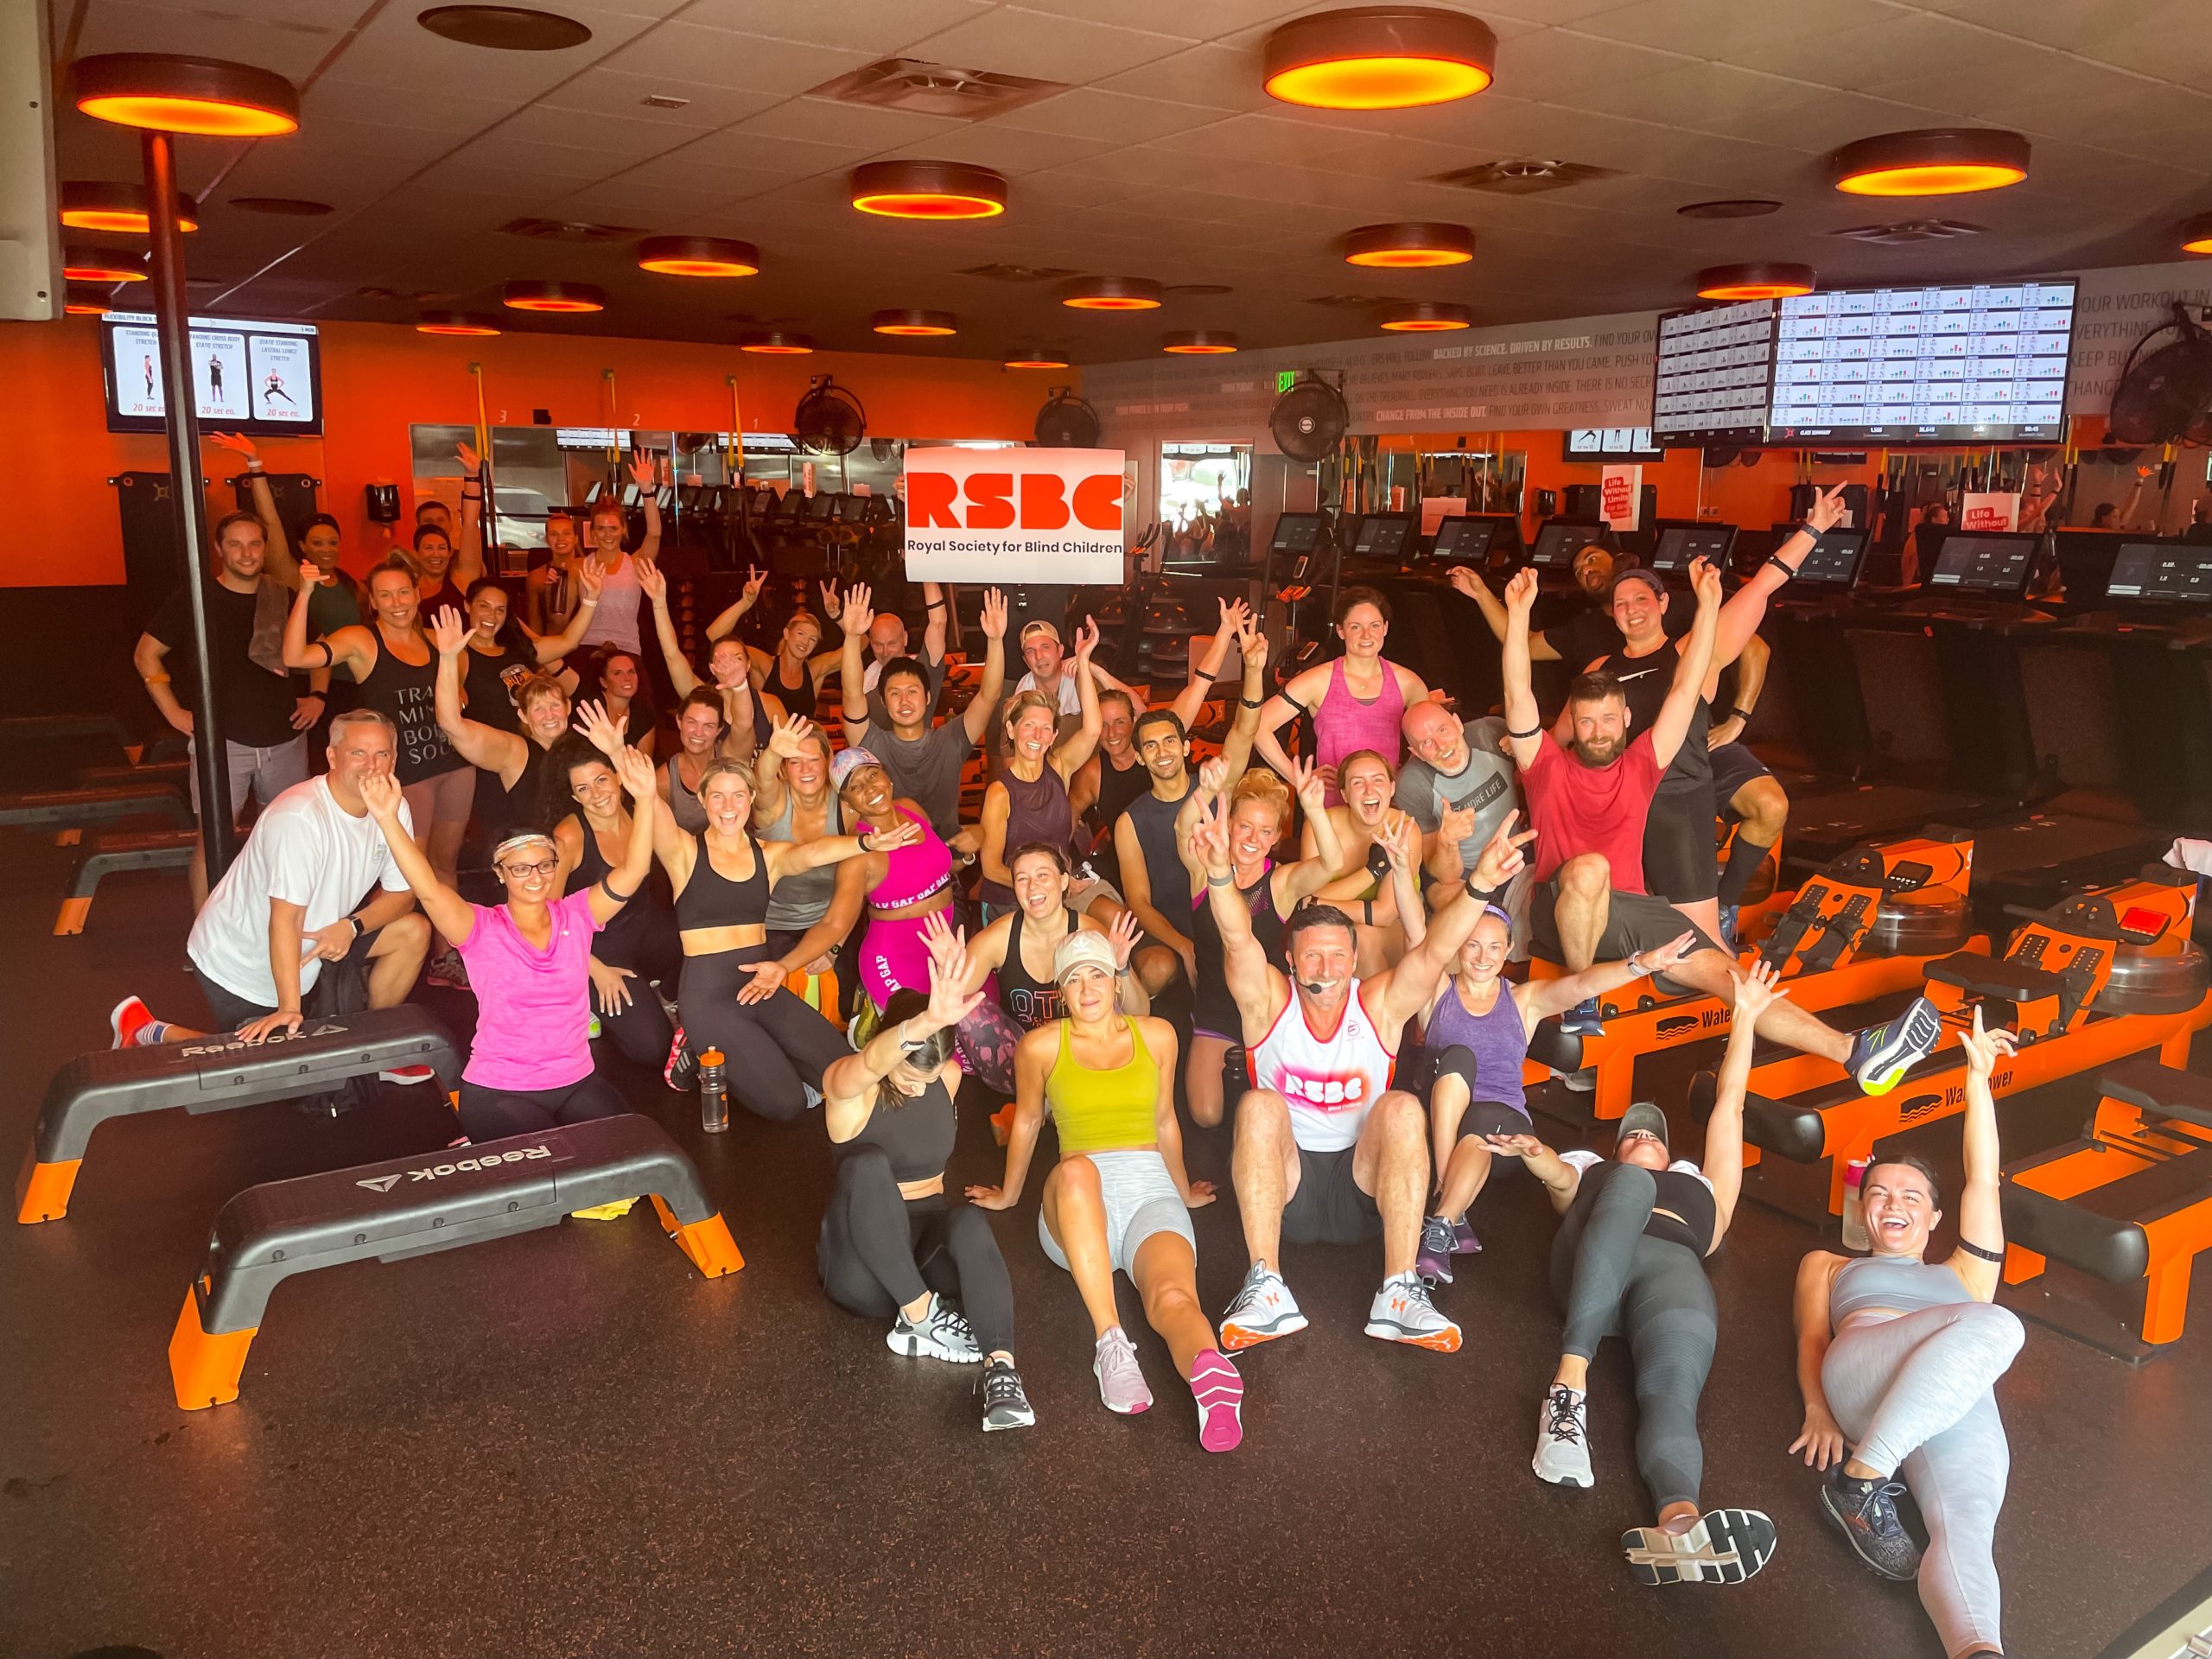 A large group of people in workout gear are gathered in a fitness studio, raising their arms and holding up a sign with the RSBC logo on.